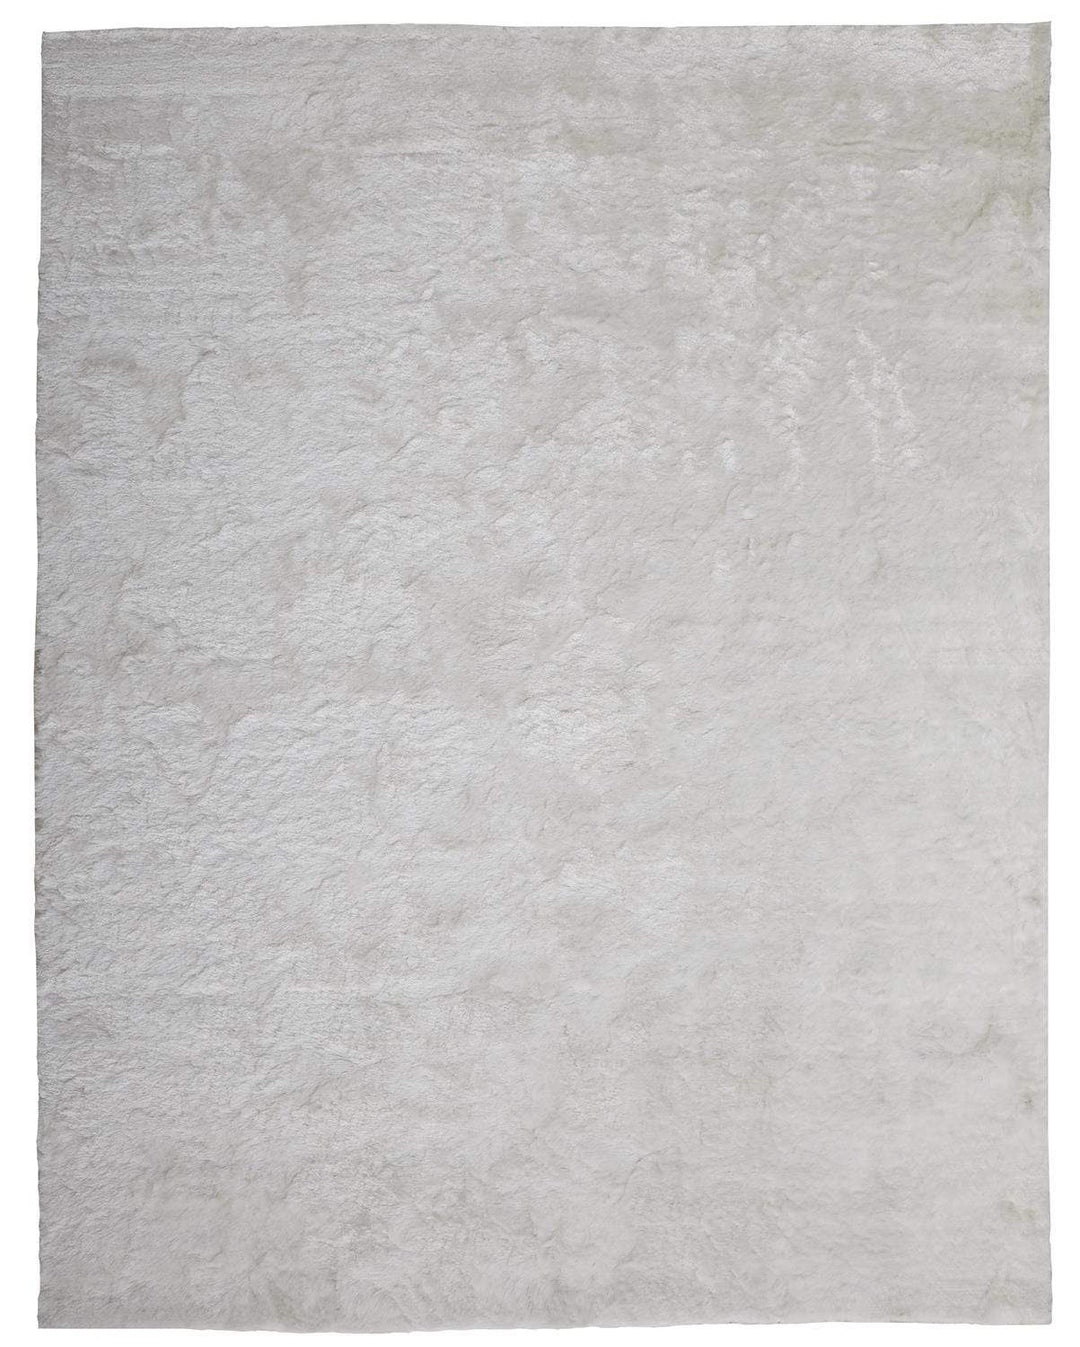 Feizy Feizy Indochine Plush Shag Rug - Available in 7 Sizes - Metallic Sheen Bright White 2' x 3'-4" 4944550FWHT000A25